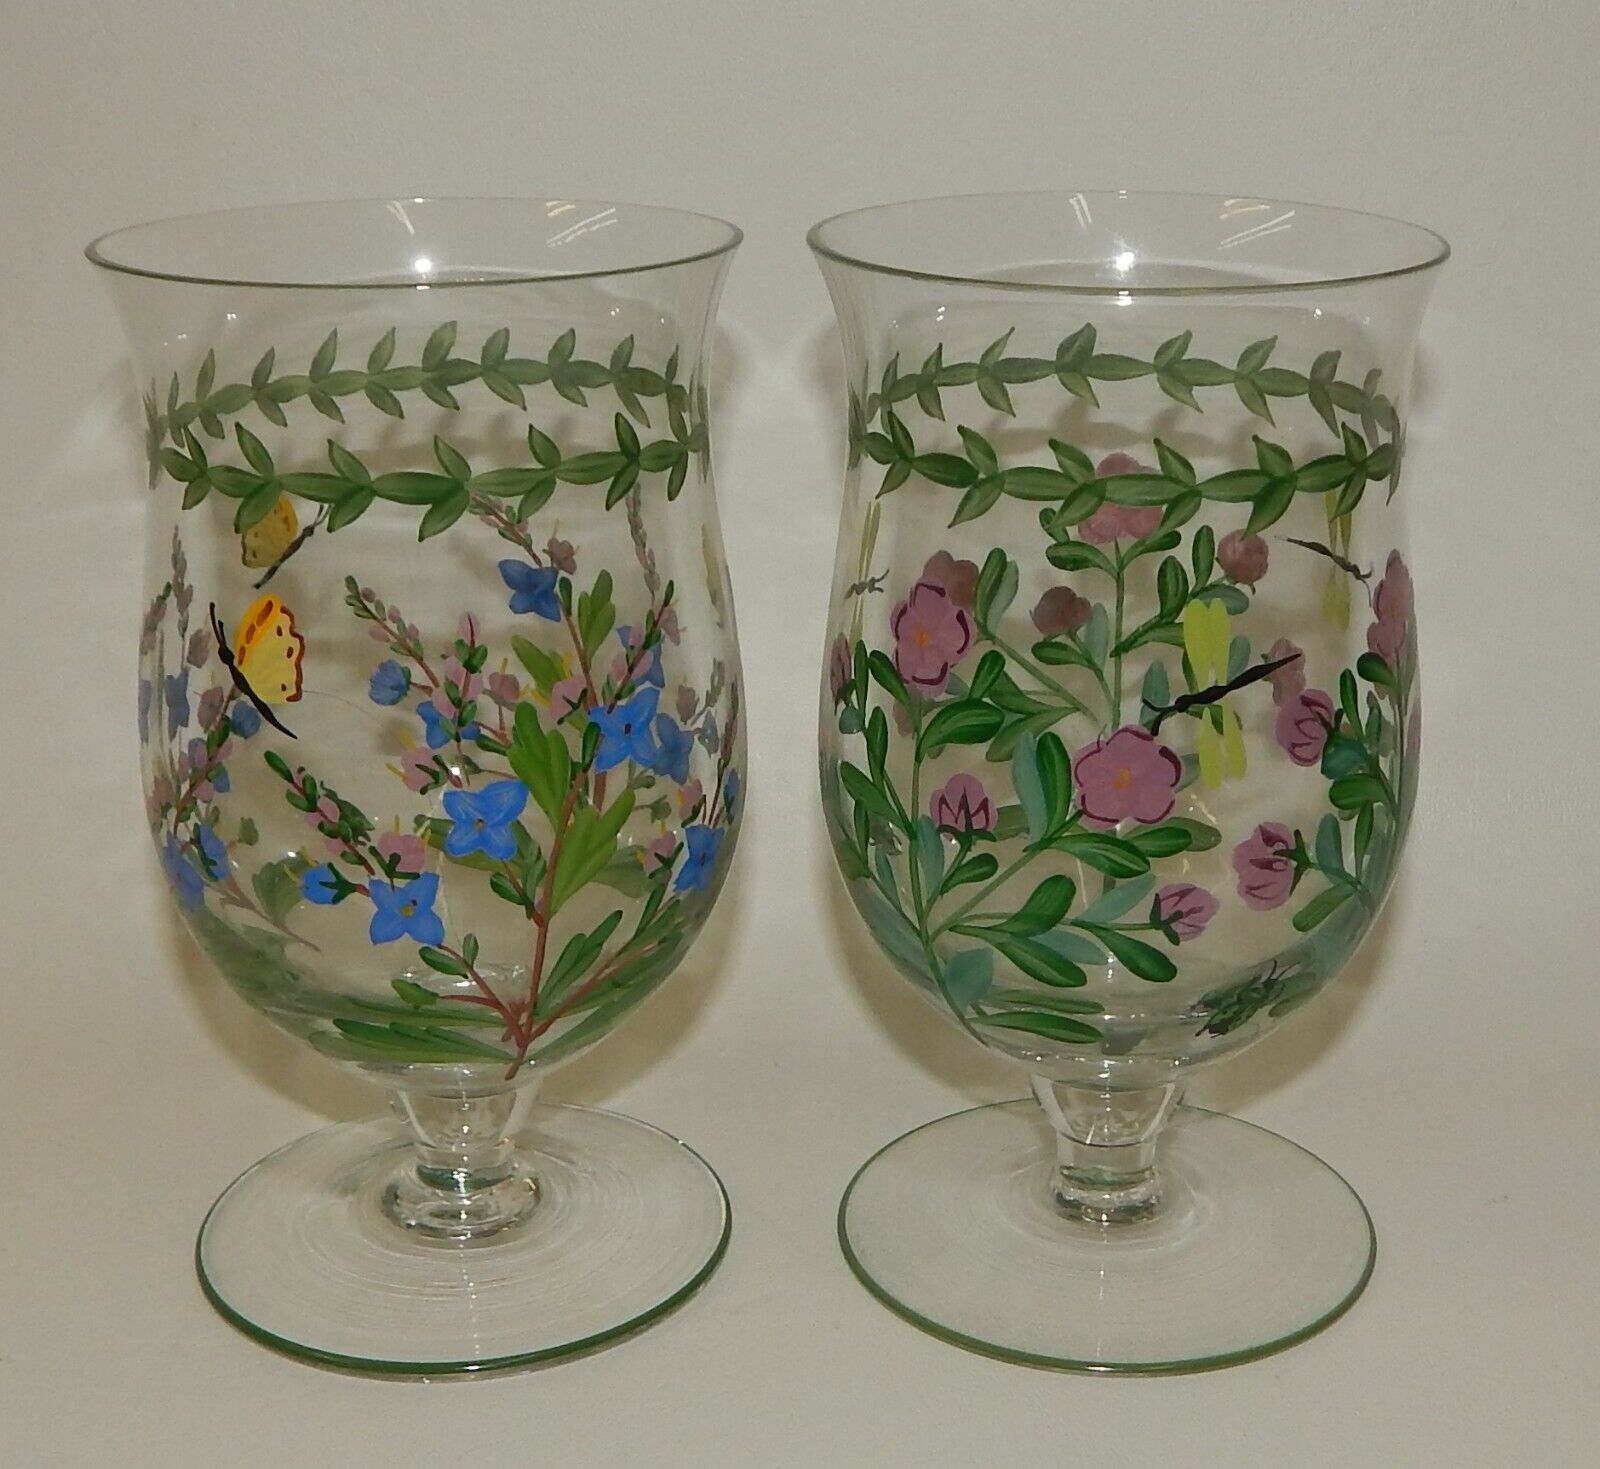 Pair of Home Essentials Williamsburg Botanical Hand-Painted Goblets Glasses